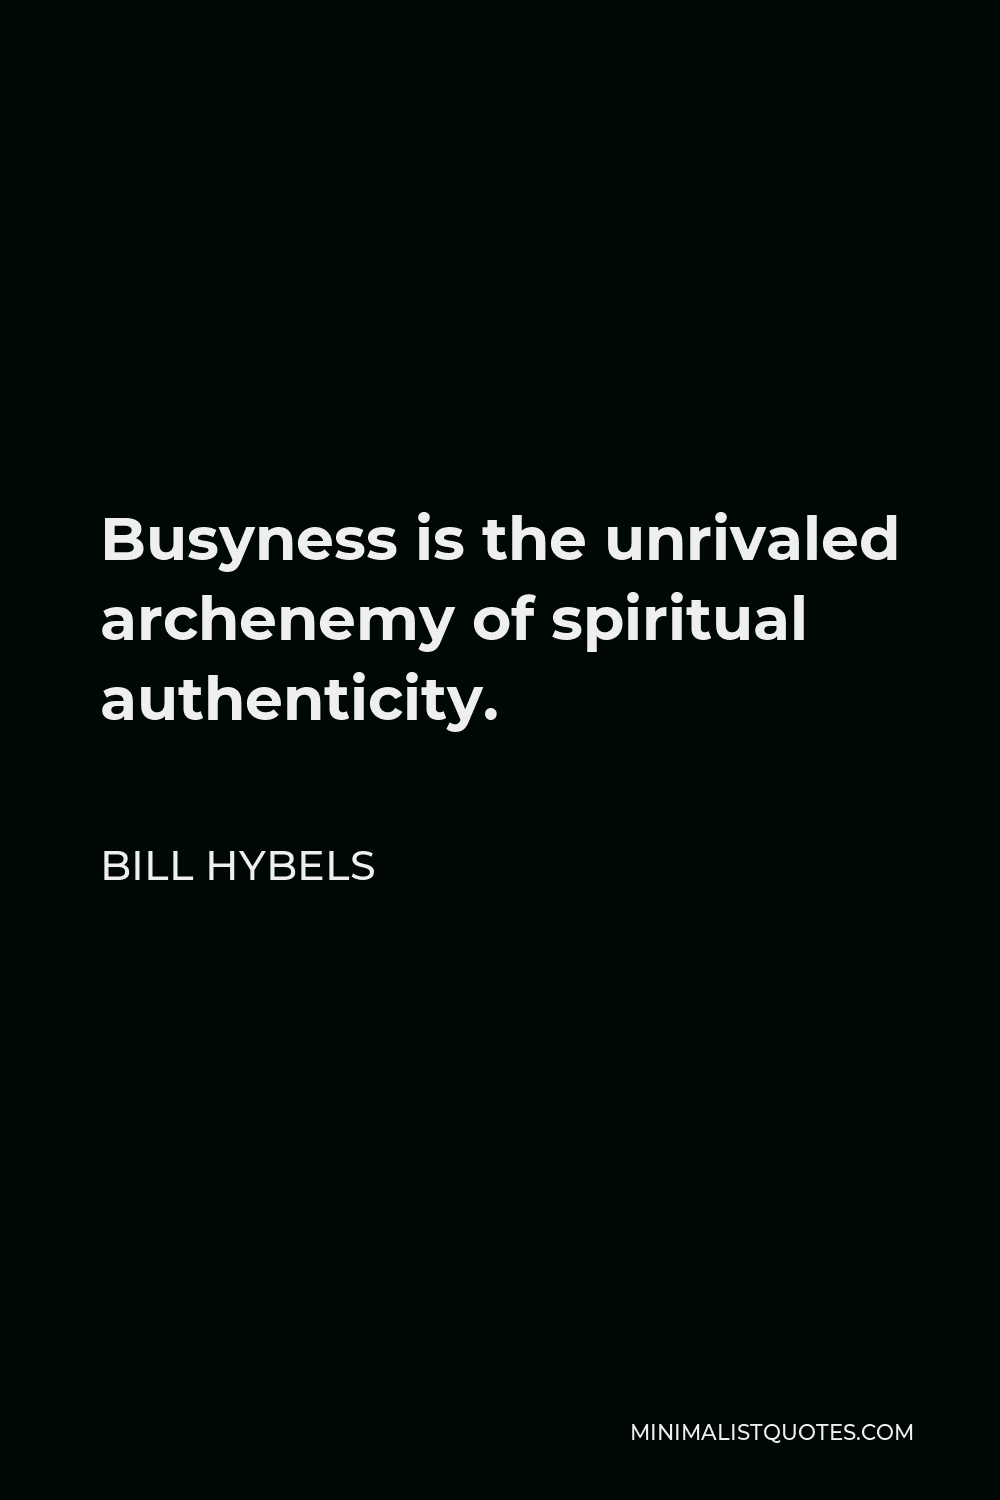 Bill Hybels Quote - Busyness is the unrivaled archenemy of spiritual authenticity.